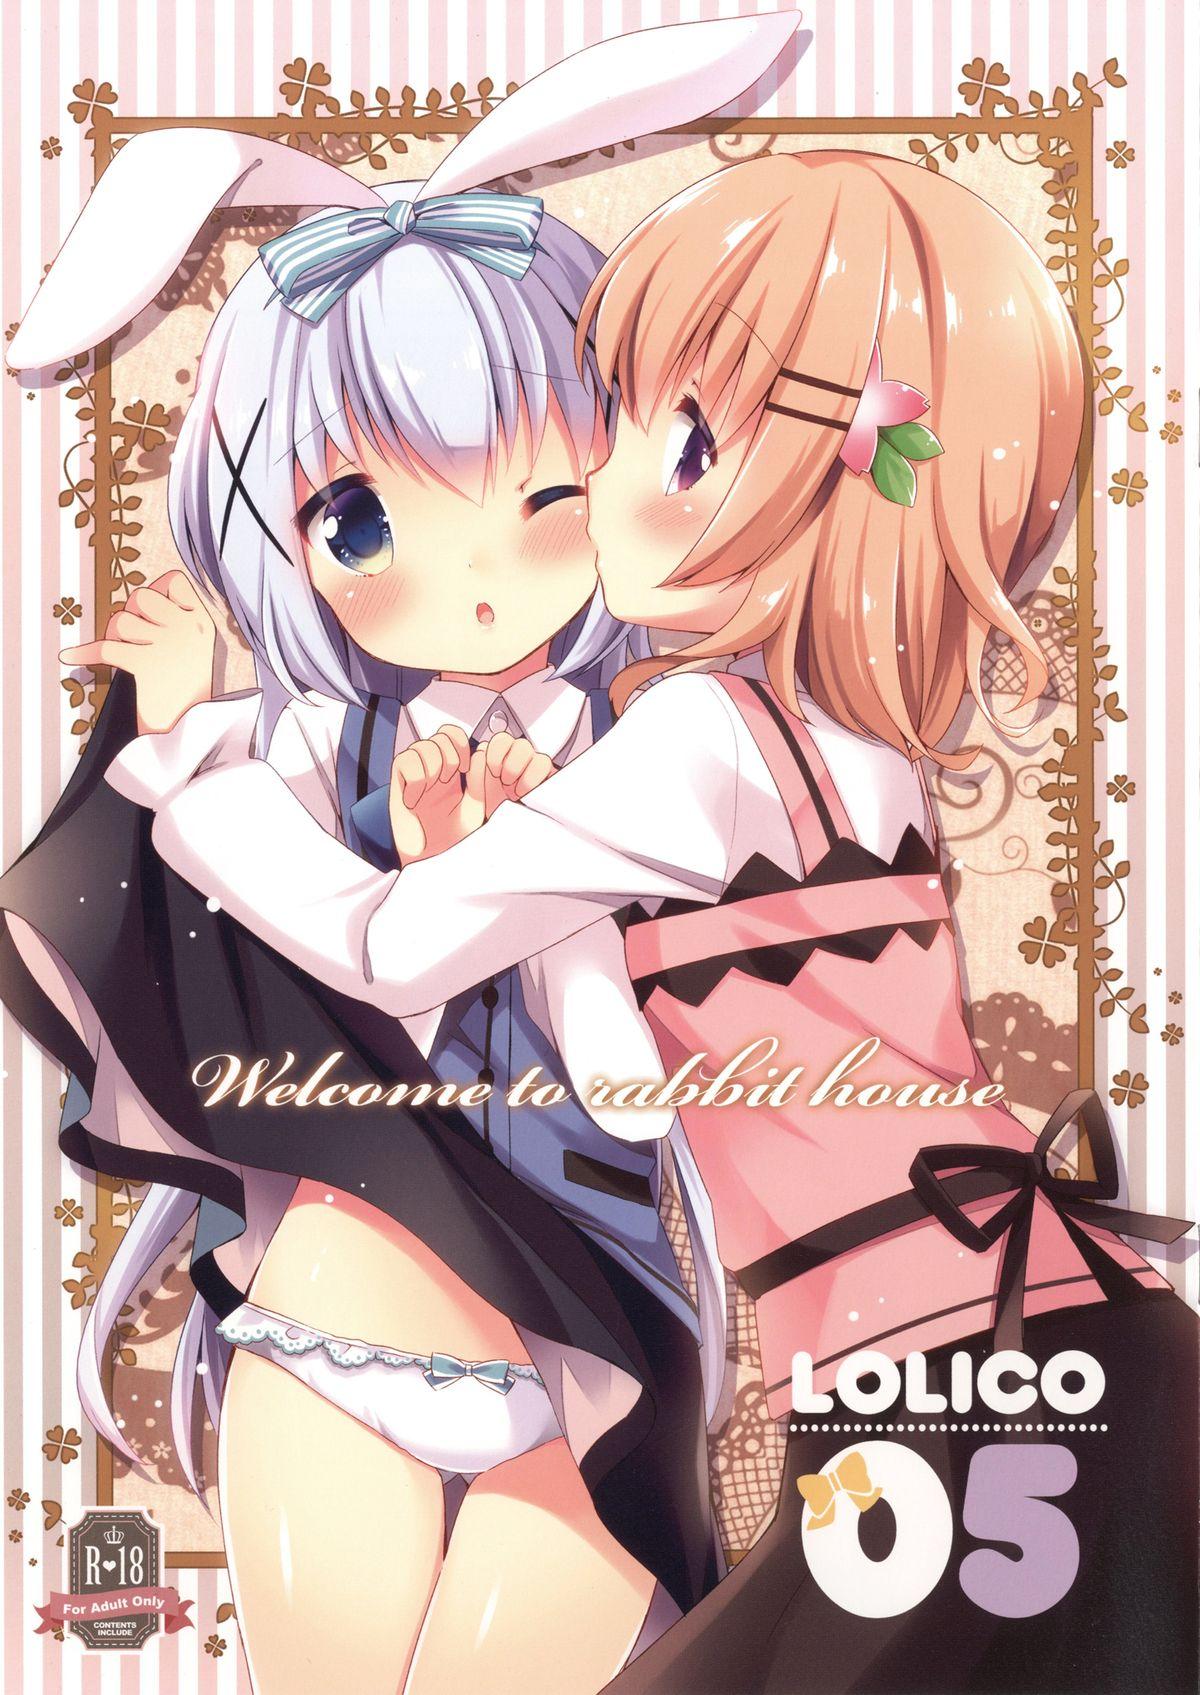 Welcome to rabbit house LoliCo05 0